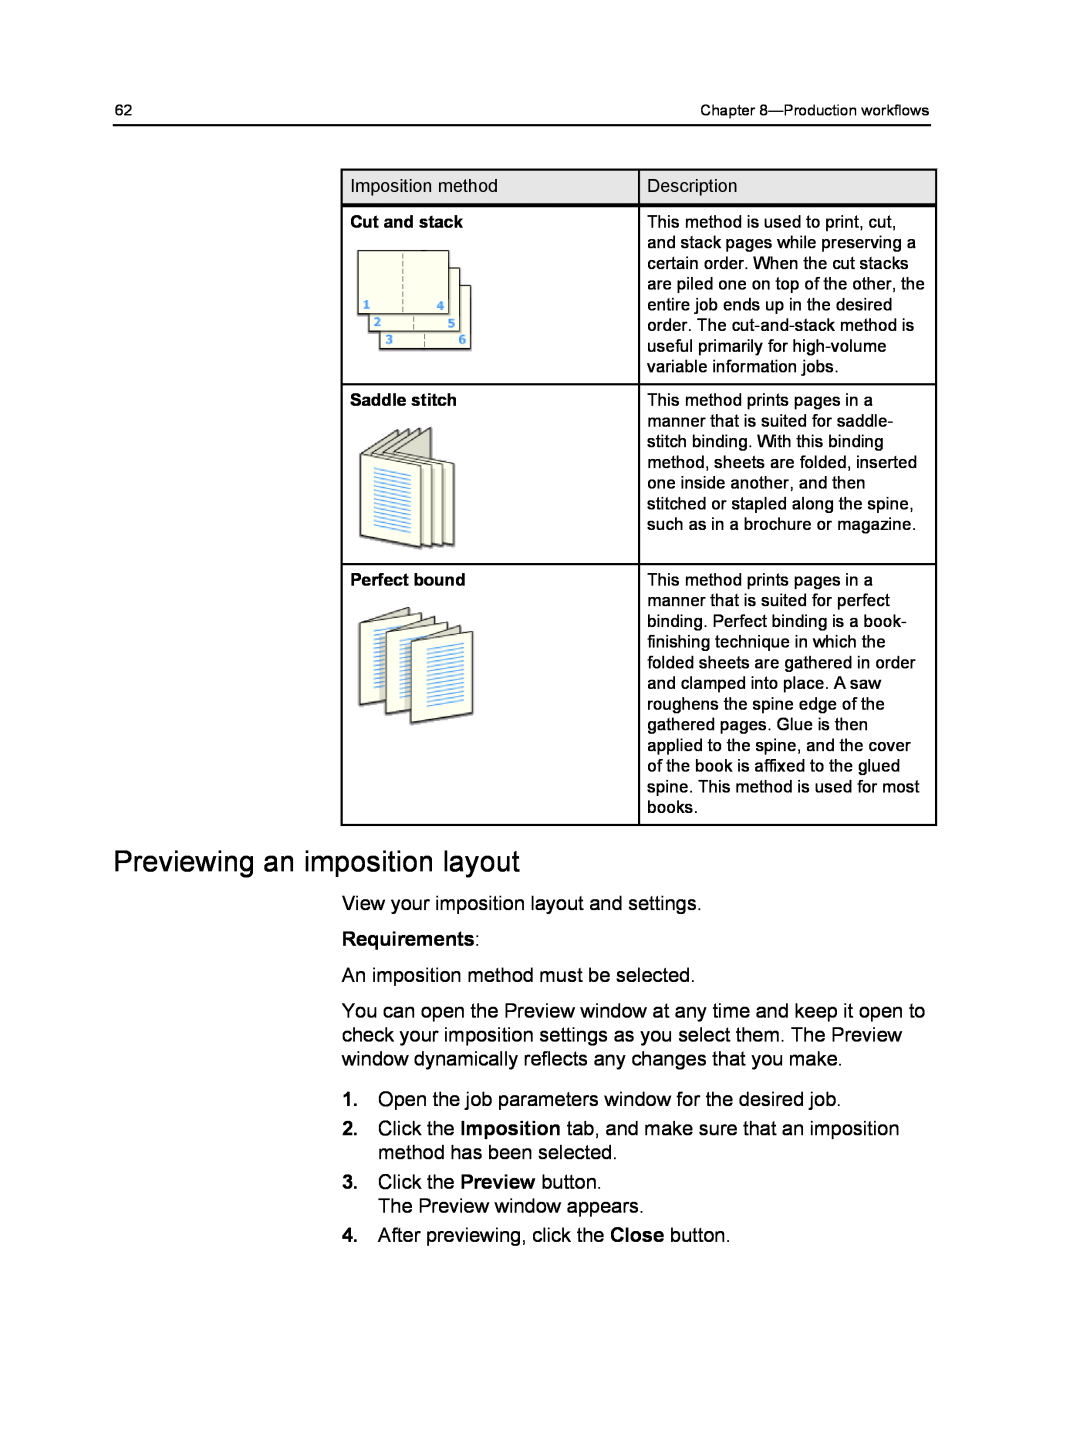 Xerox 560, 550 manual Previewing an imposition layout, Requirements 